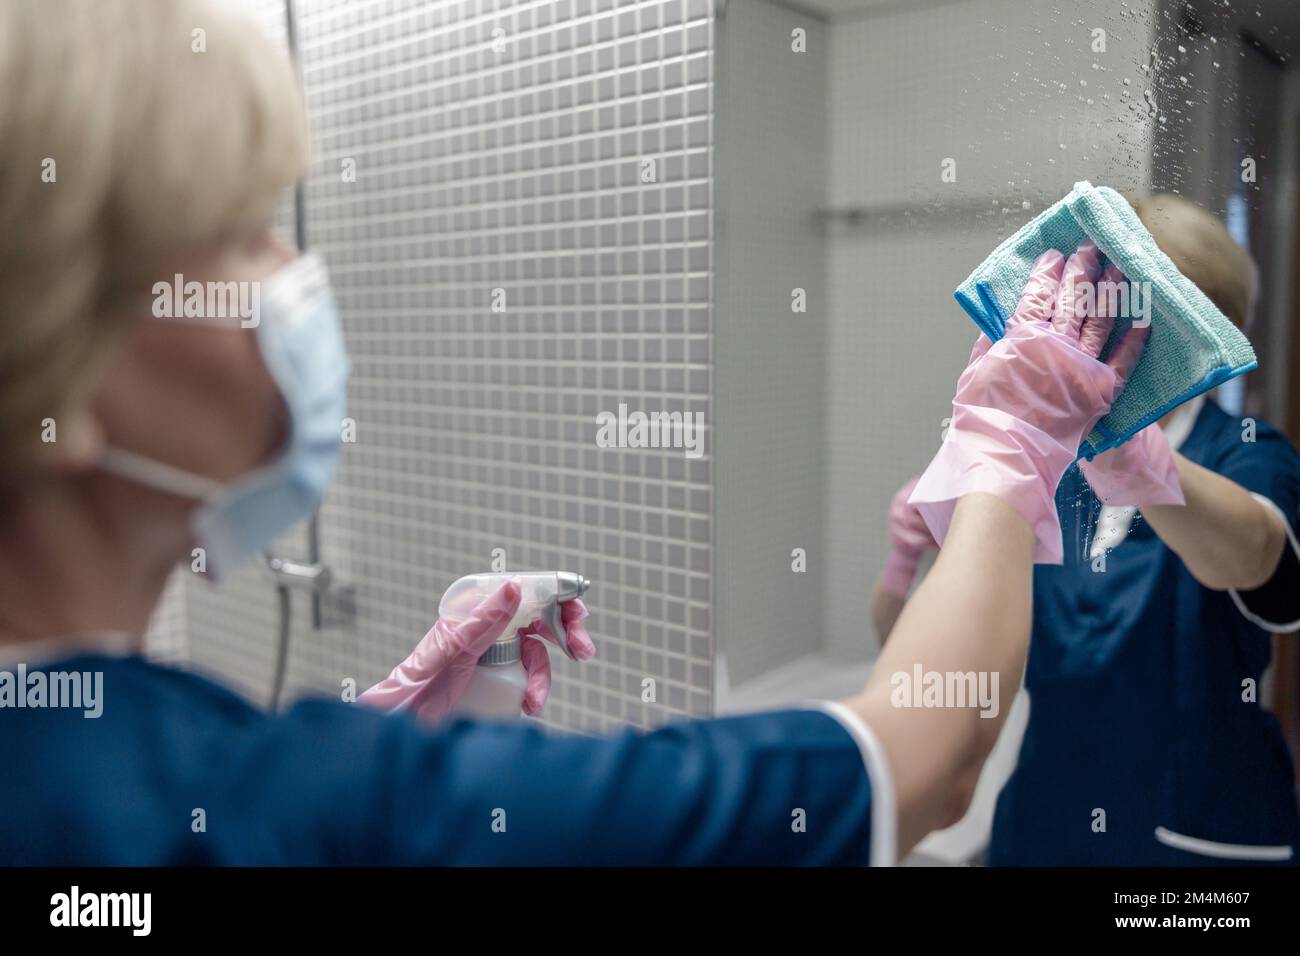 Chambermaid in mask cleans mirror in hotel bathroom spraying detergent on surface Stock Photo